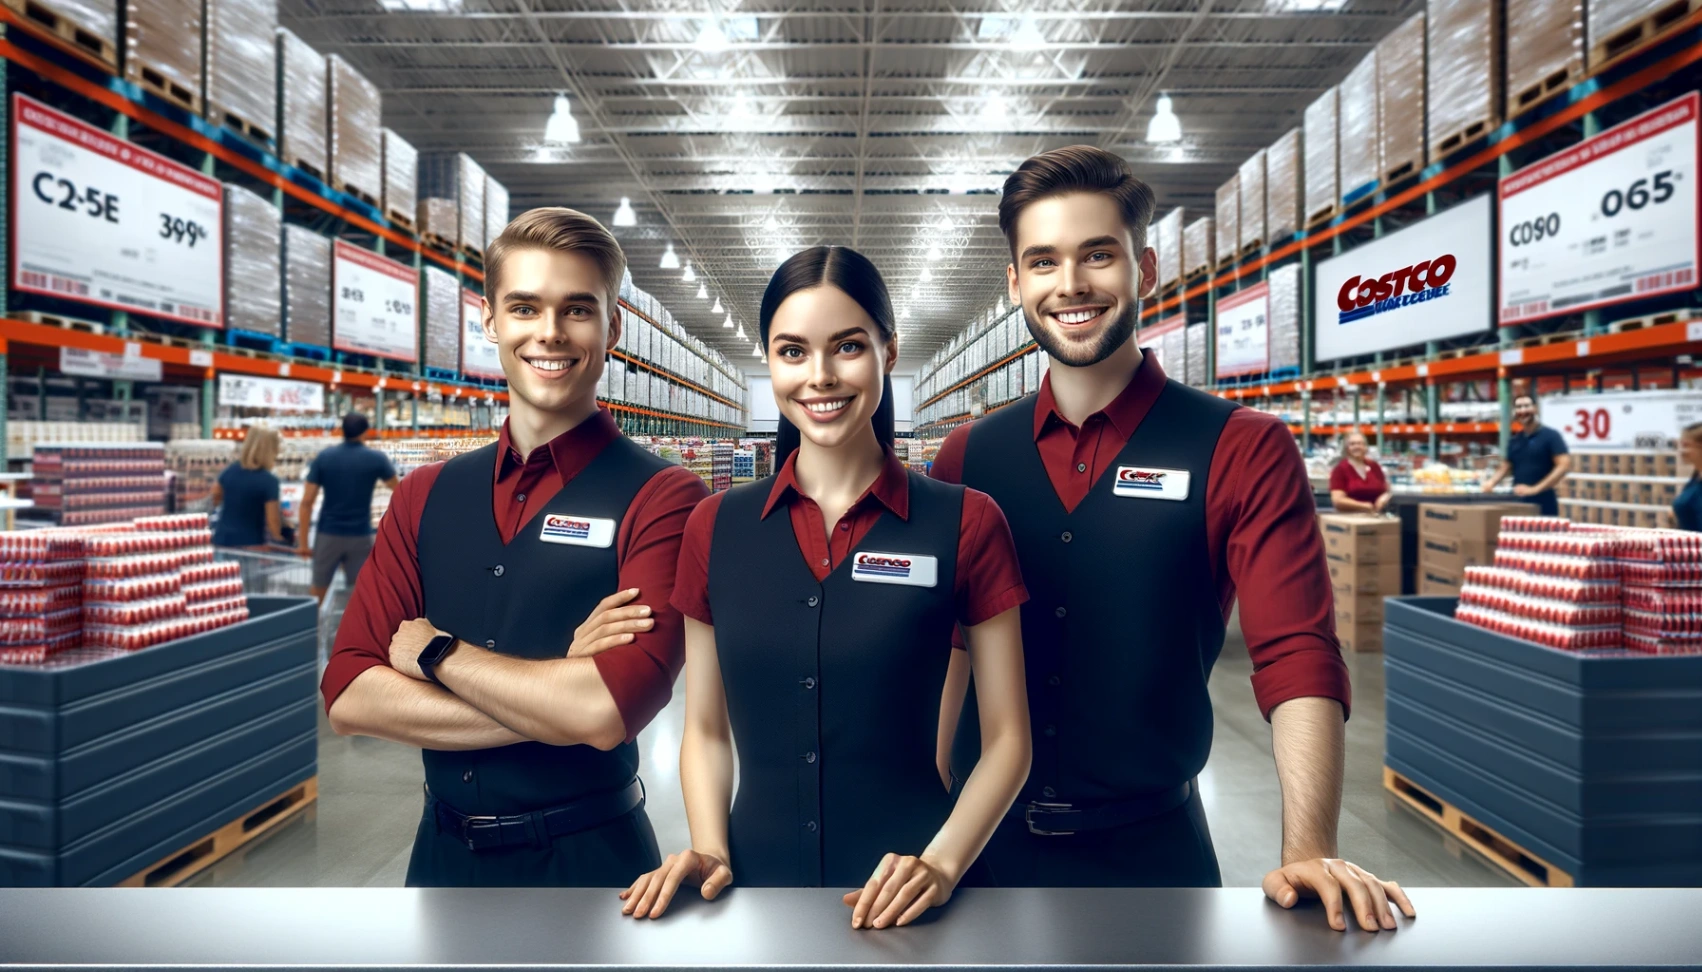 Learn How to Find Jobs at Costco